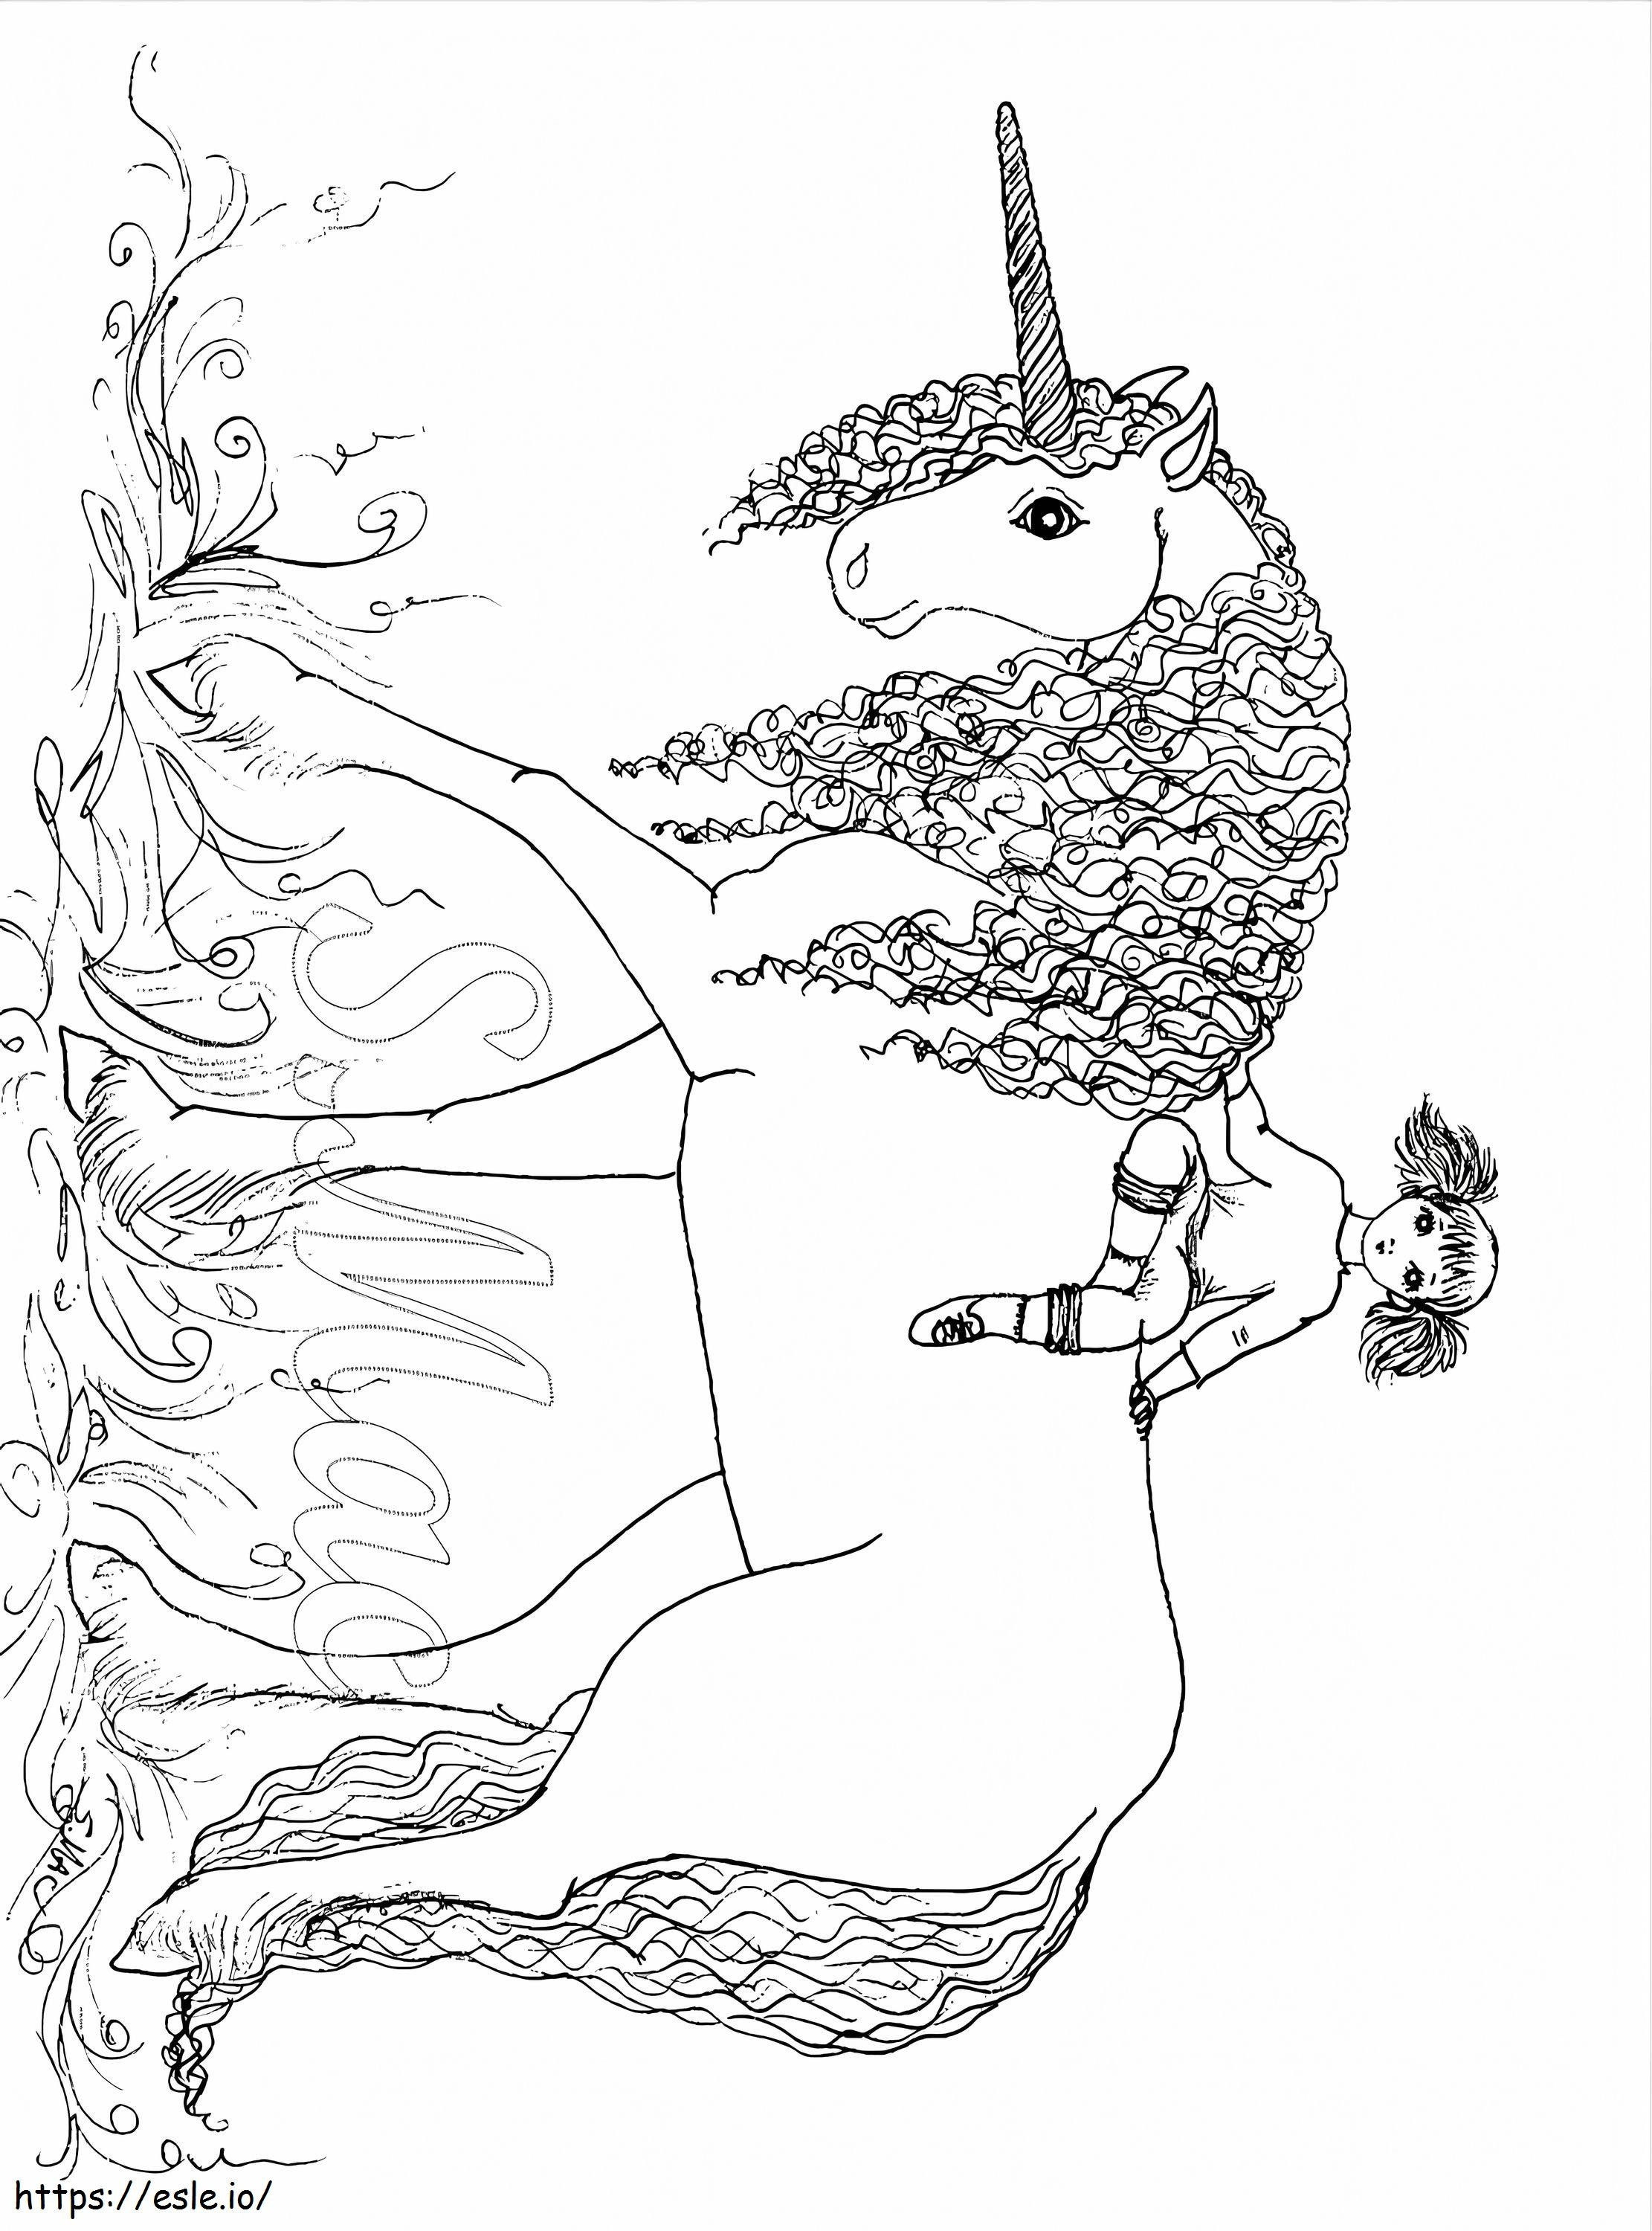 1563844325 Little Girl On Unicorn A4 coloring page